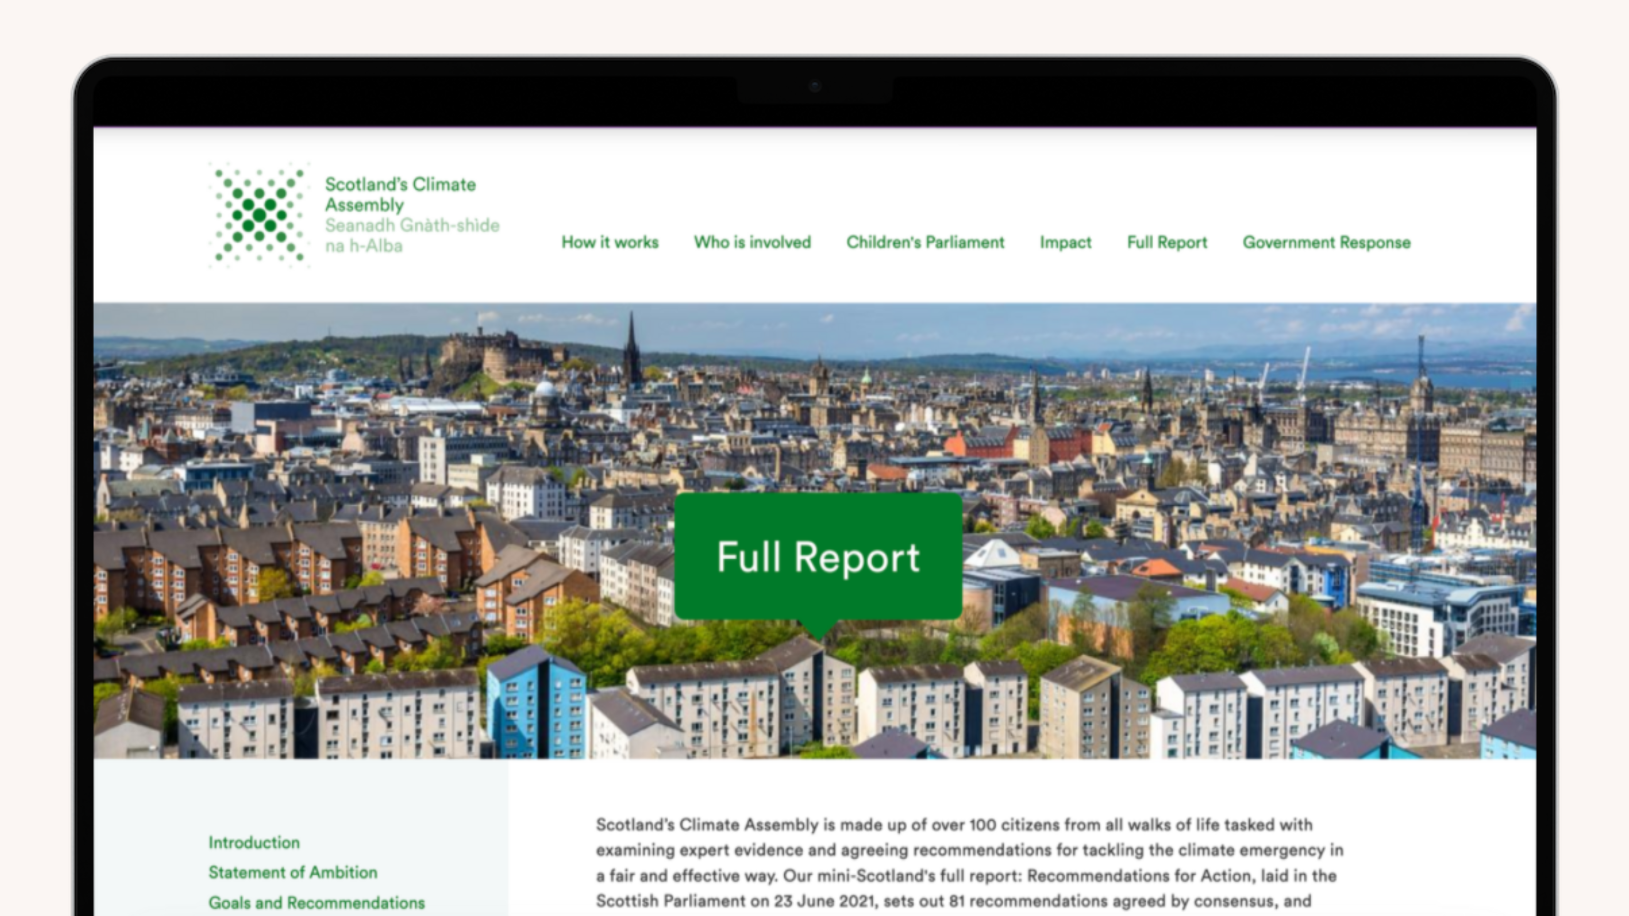 Mockup of the landing page for Scotland's climate assembly